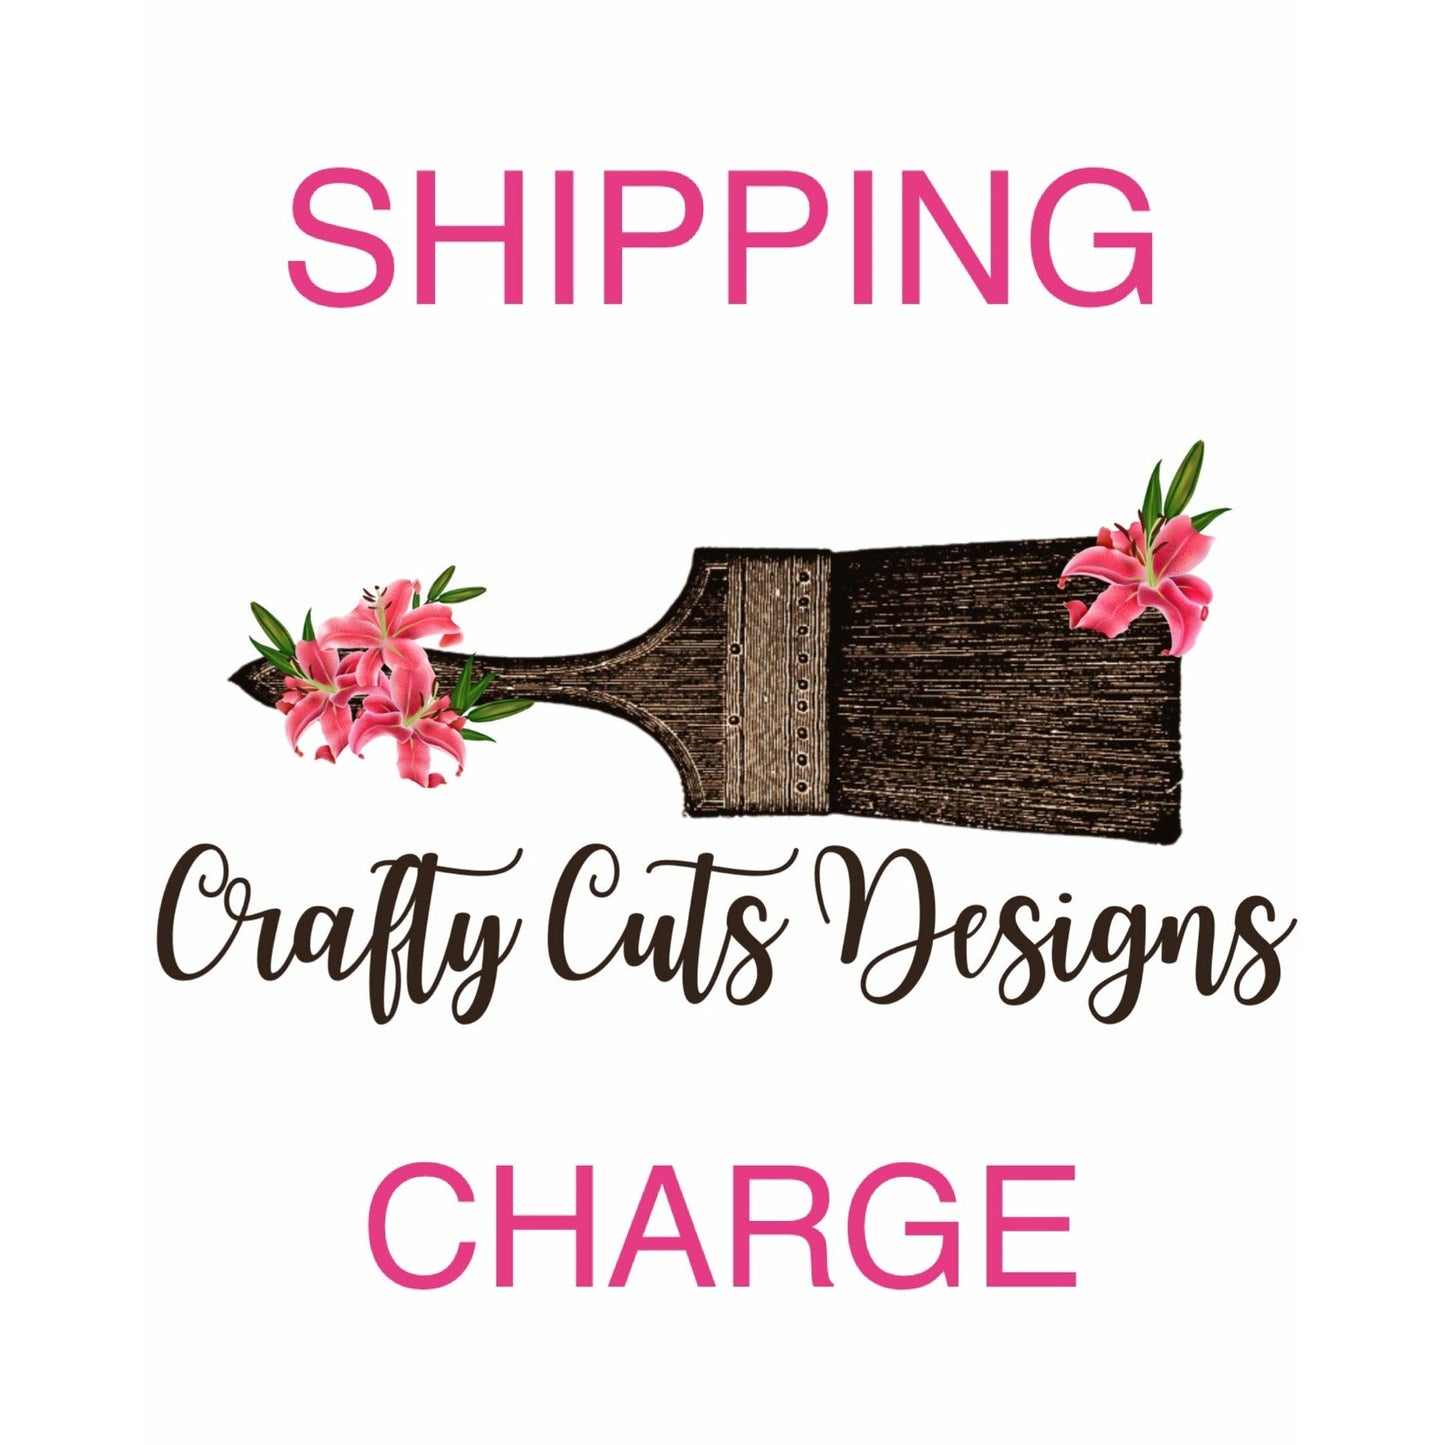 PCHSW Shipping Charge